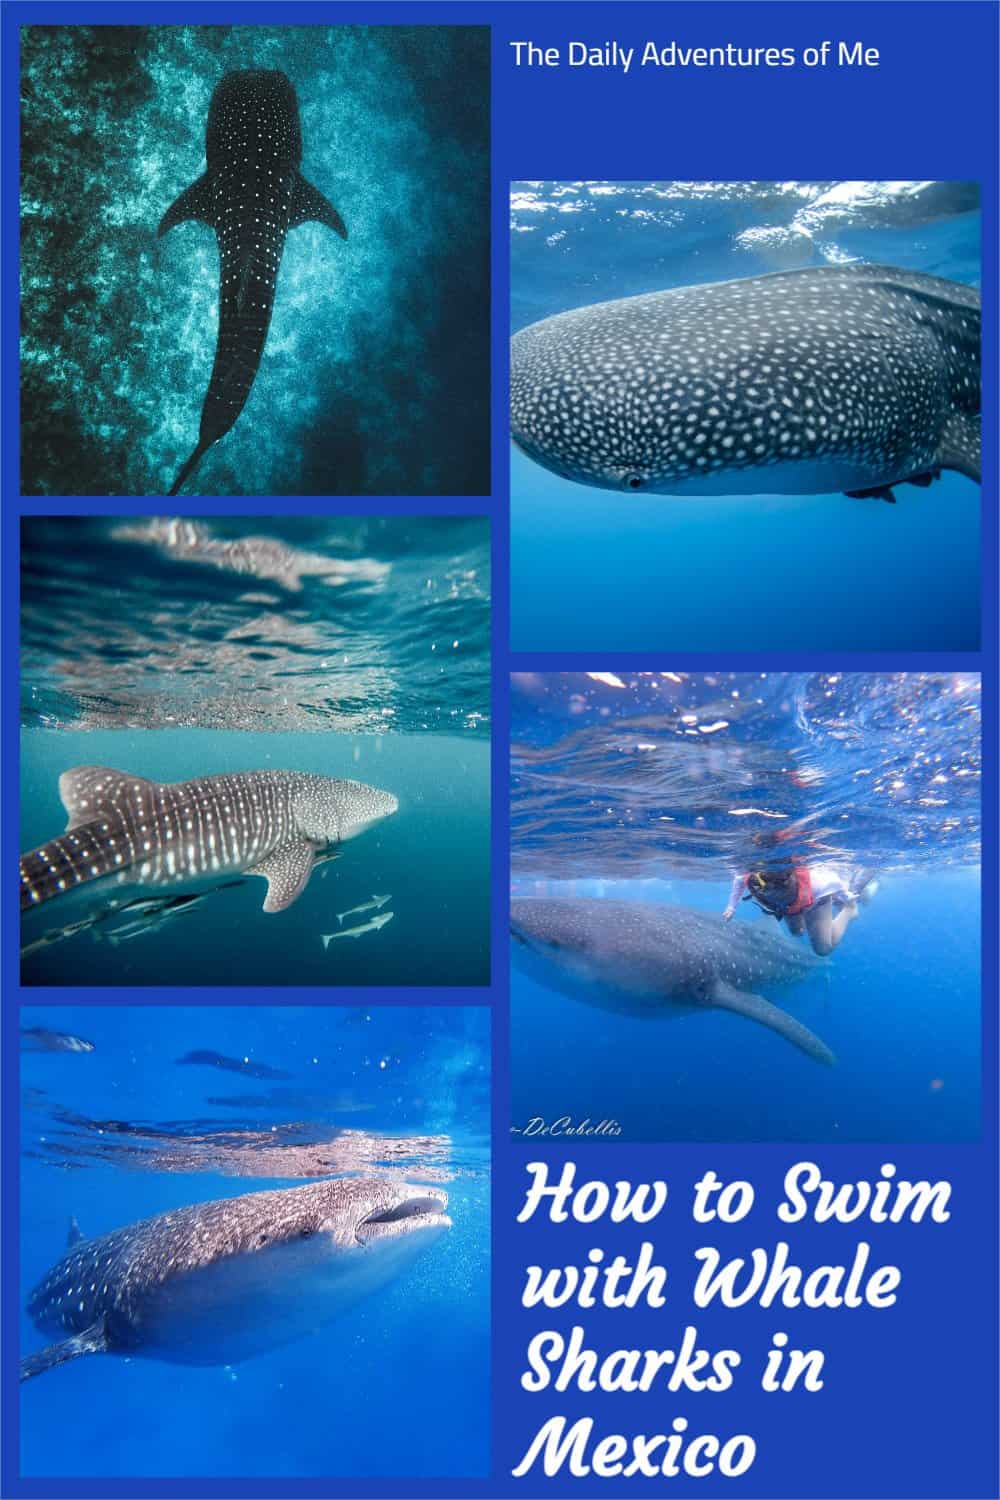 Take an adventure of a lifetime by swimming with whale sharks around Cancun, Mexico. #CancunBucketList #Swimmingwithsharks #visitMexico